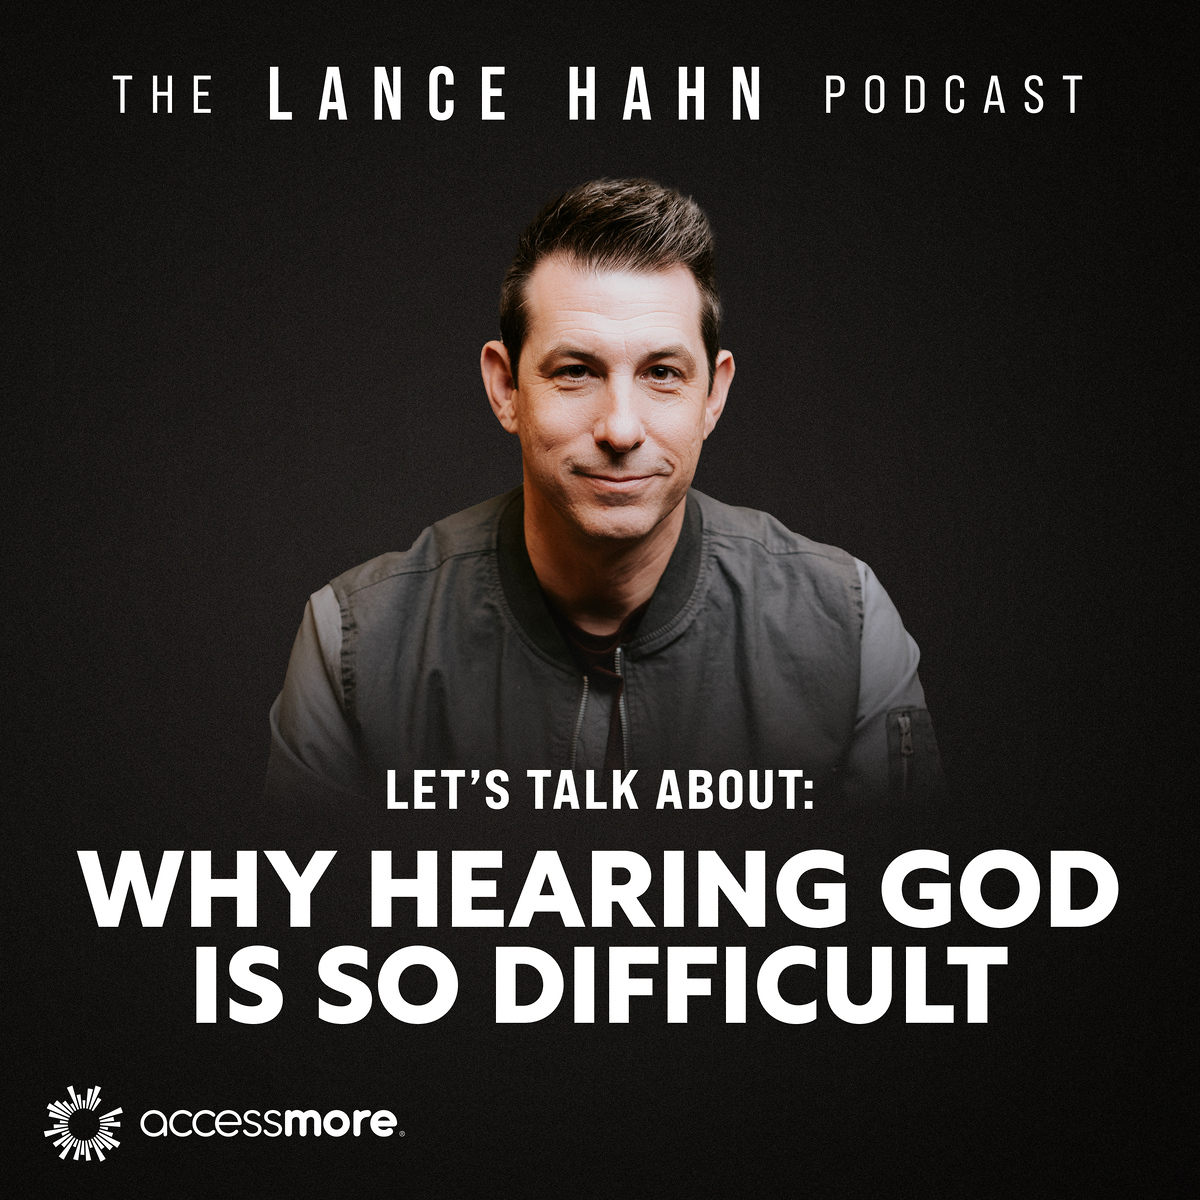 Let's Talk About Why Hearing God Is So Difficult